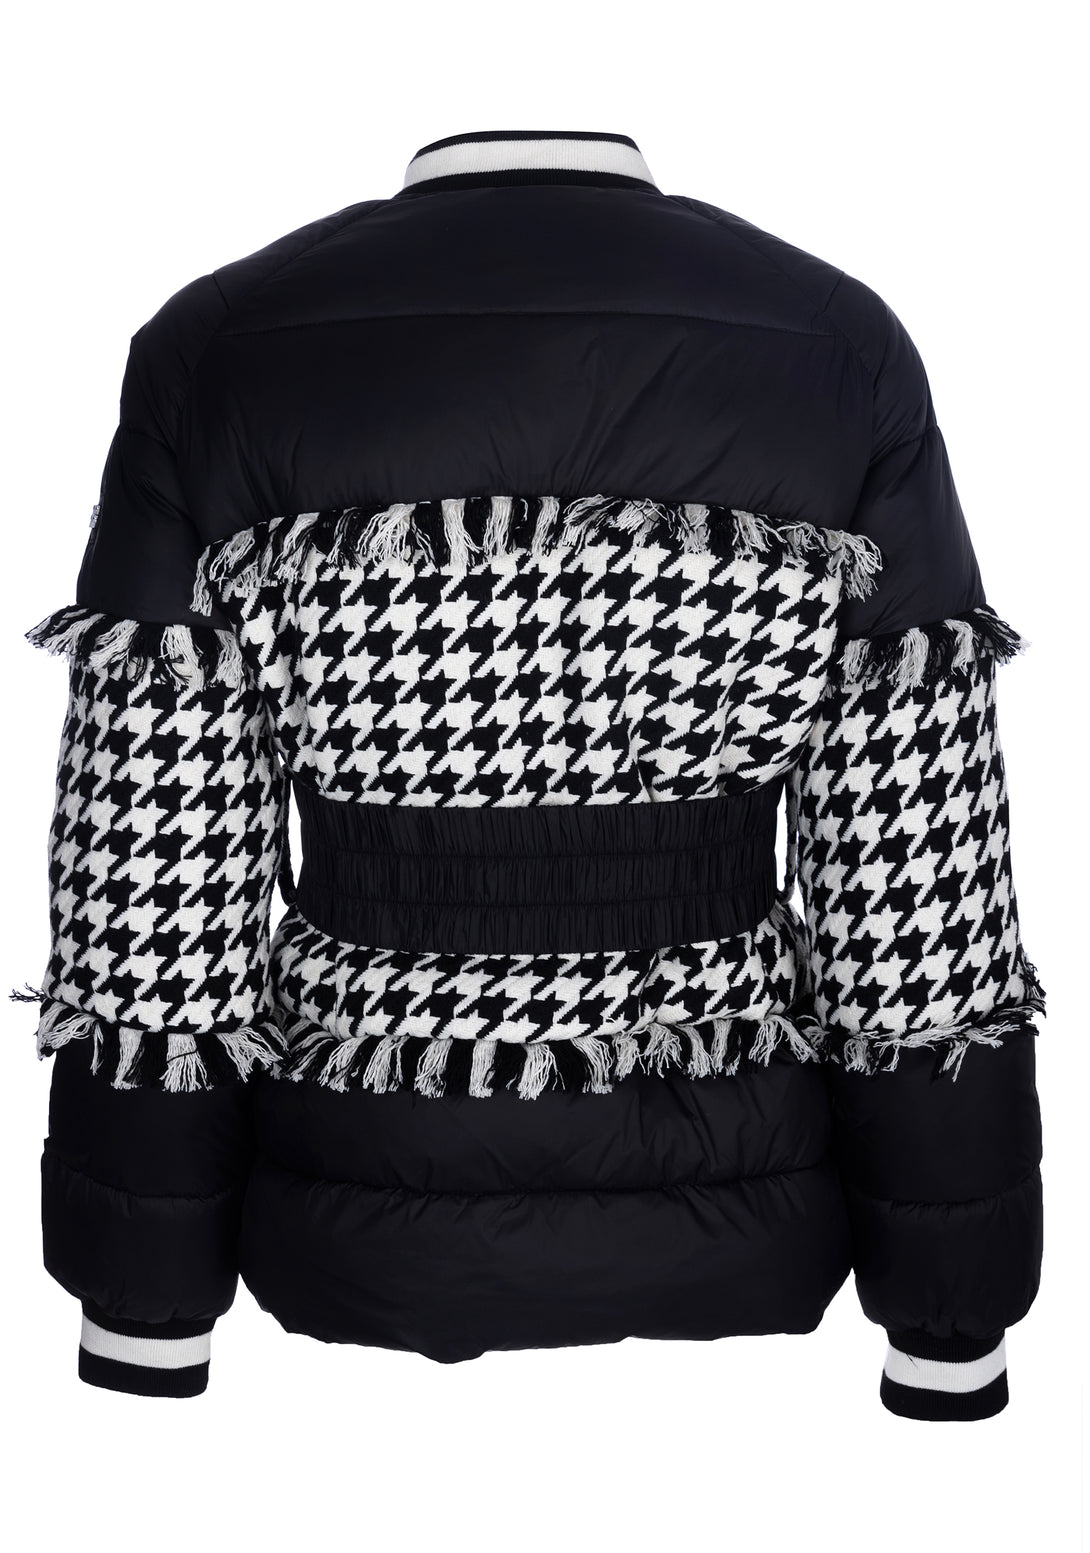 Padded jacket regular fit made with mixed fabric